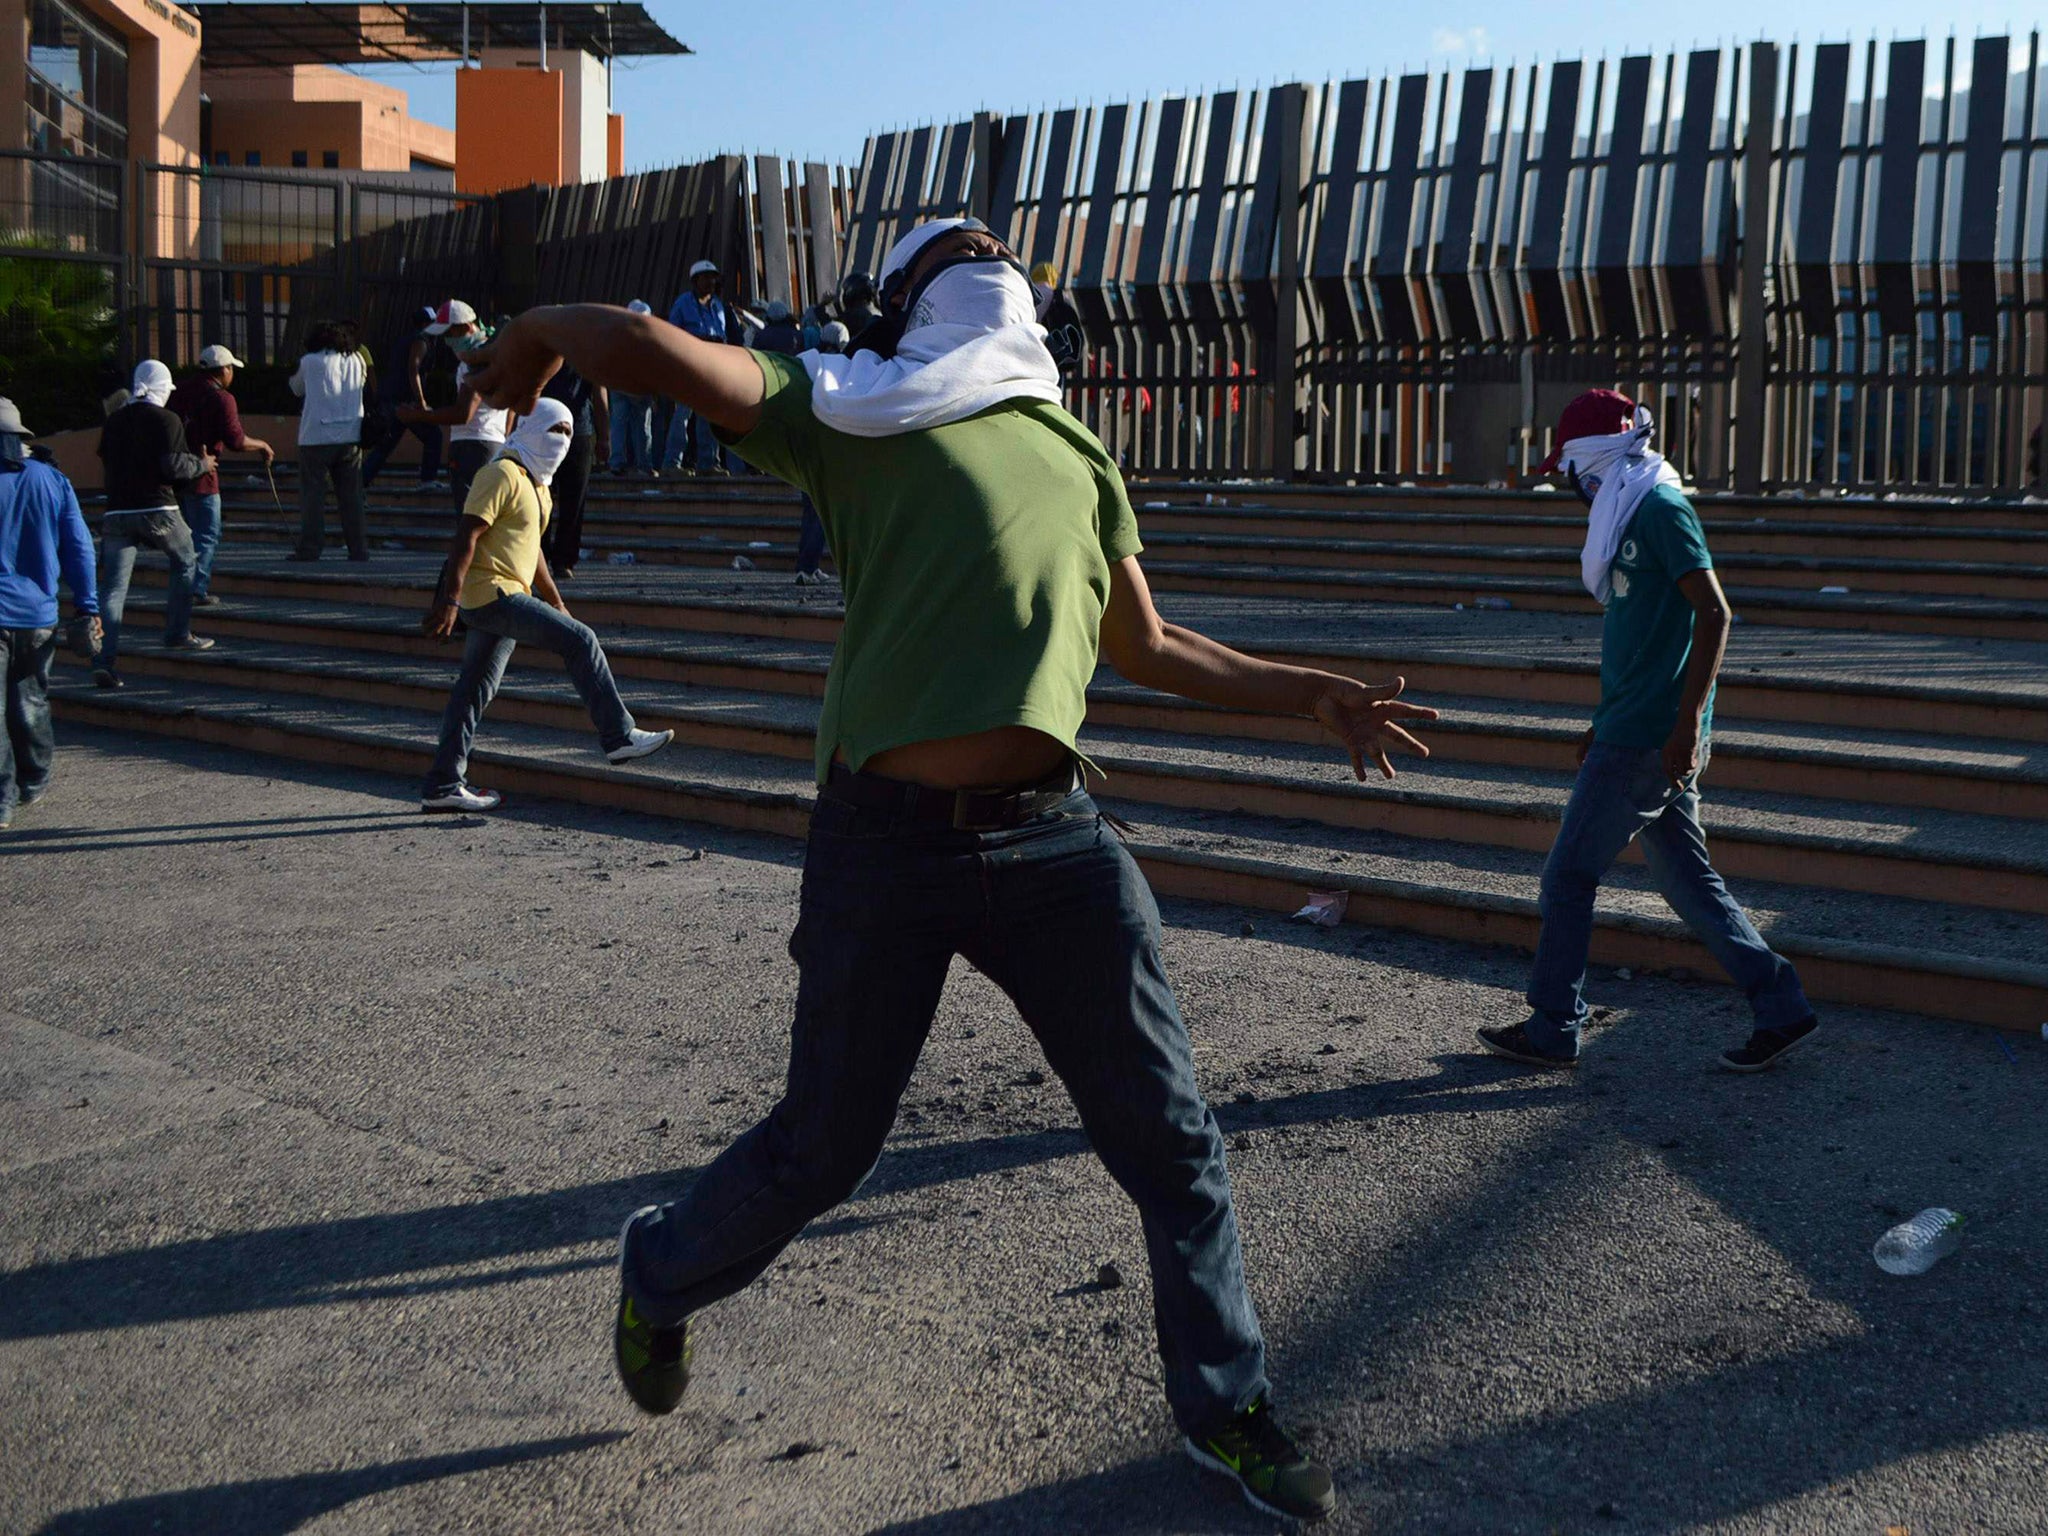 A student of the Ayotzinapa Teacher Training College "Raul Isidro Burgos" throws a stone during a protest